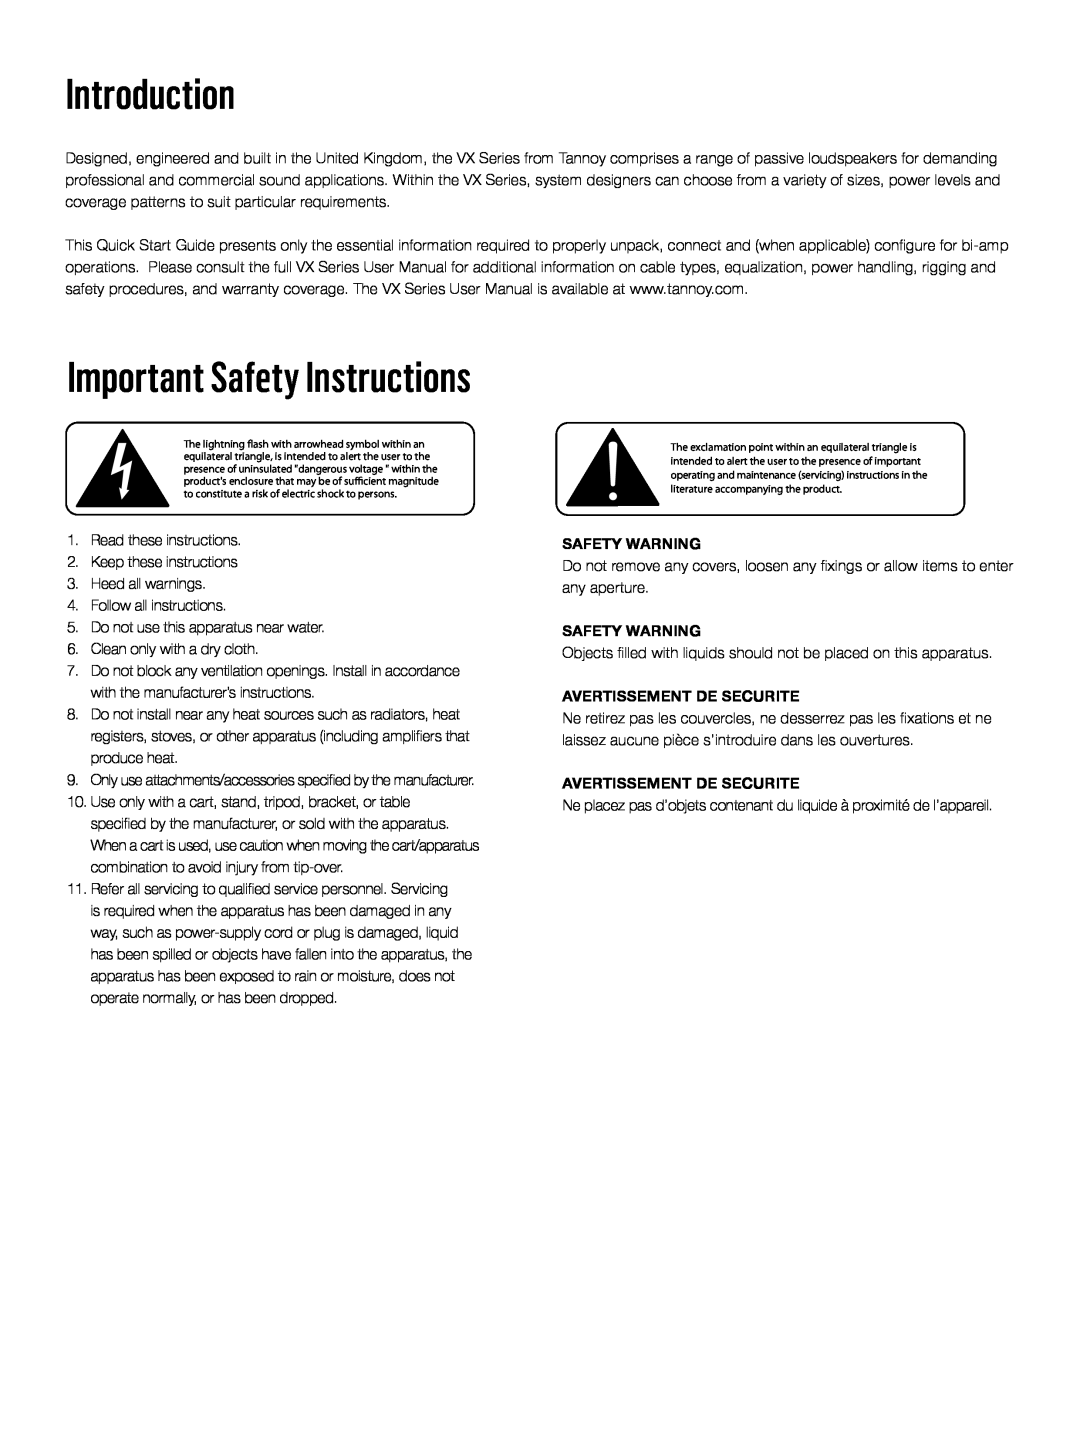 2JANE VX Series manual Introduction, Important Safety Instructions, Safety Warning, Avertissement De Securite 